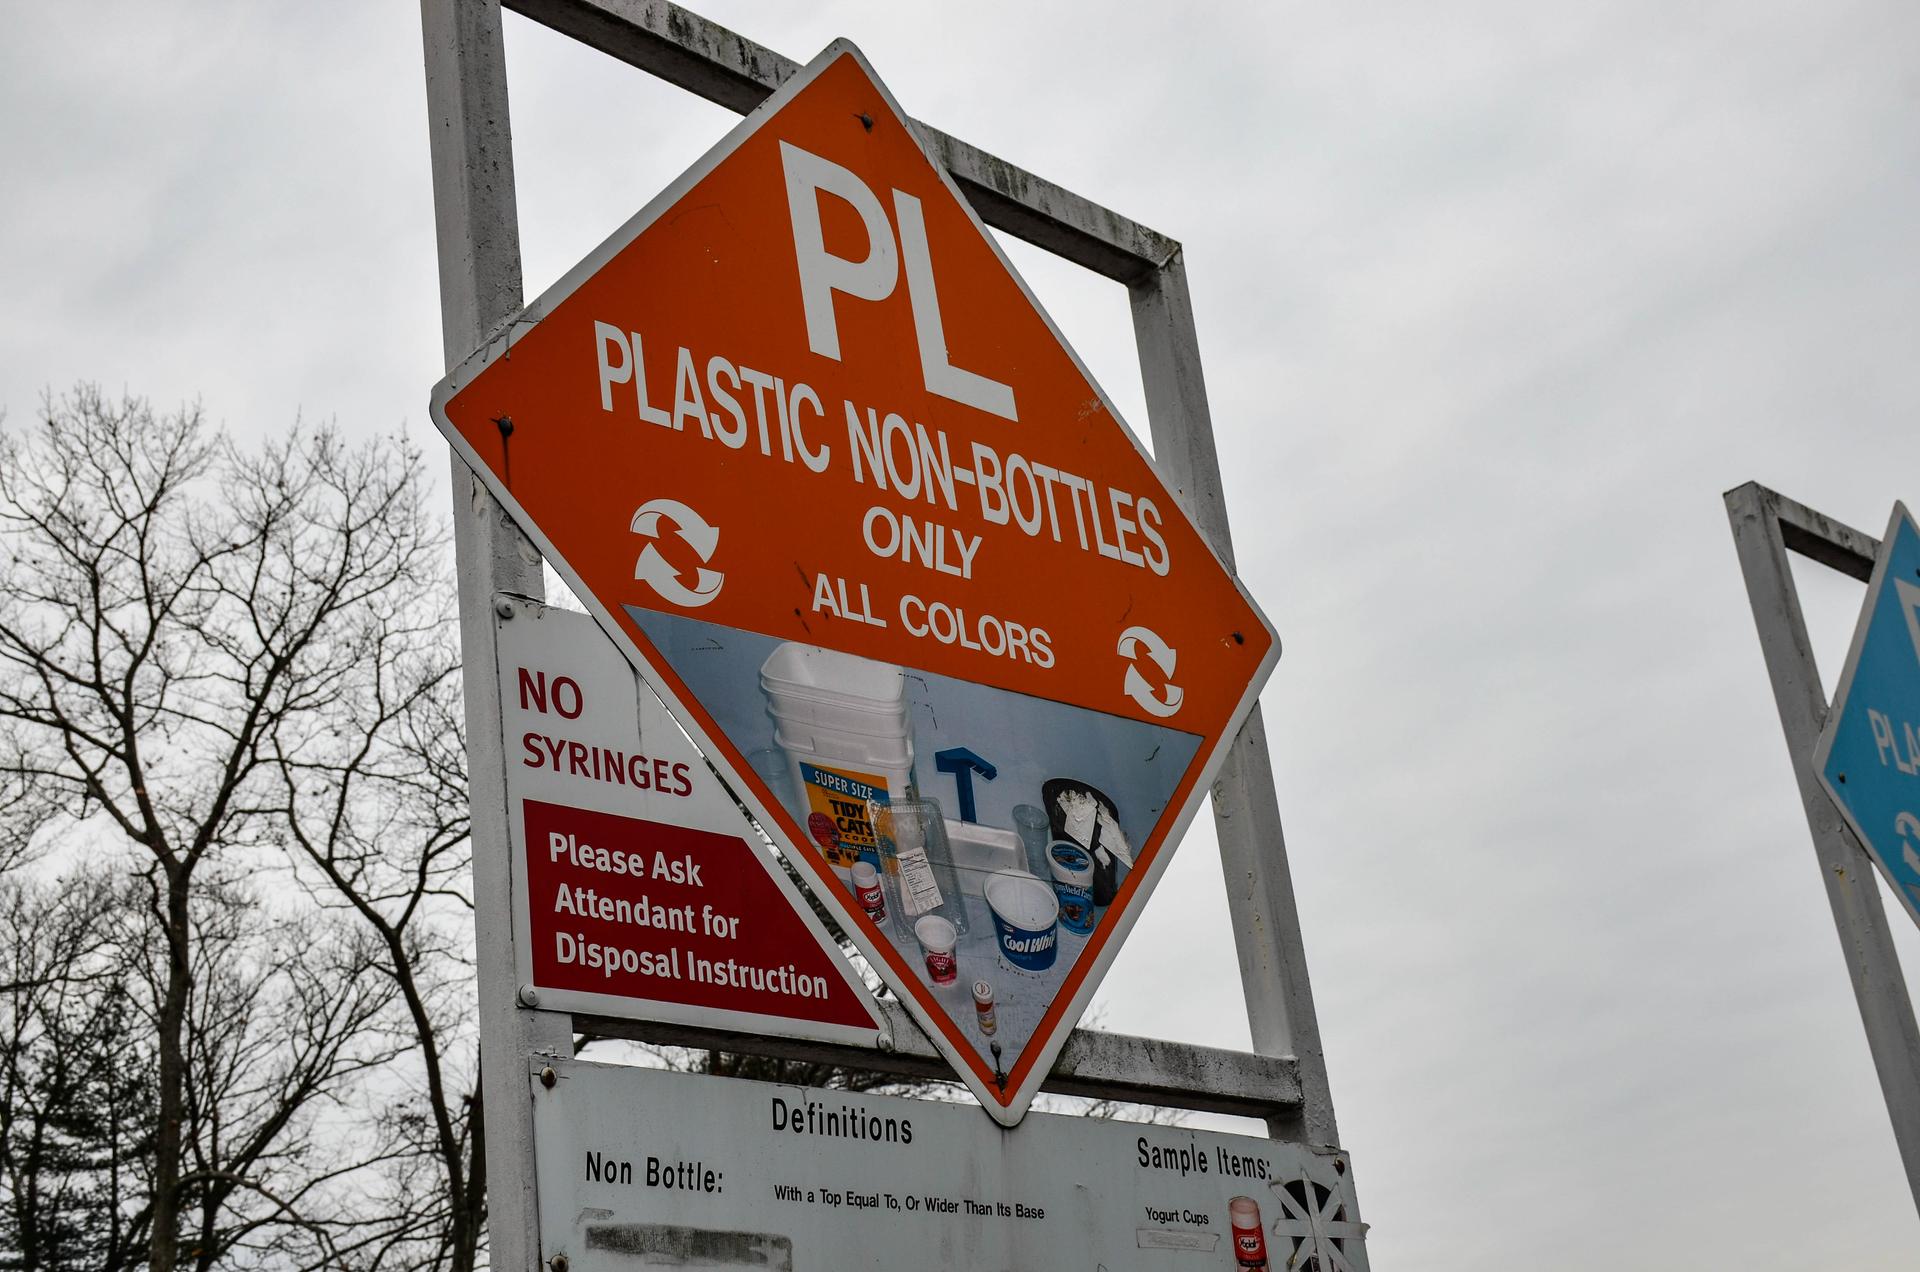 The recycling center in Wellesley, Massachusetts, has large posters guiding residents were to deposit their items.